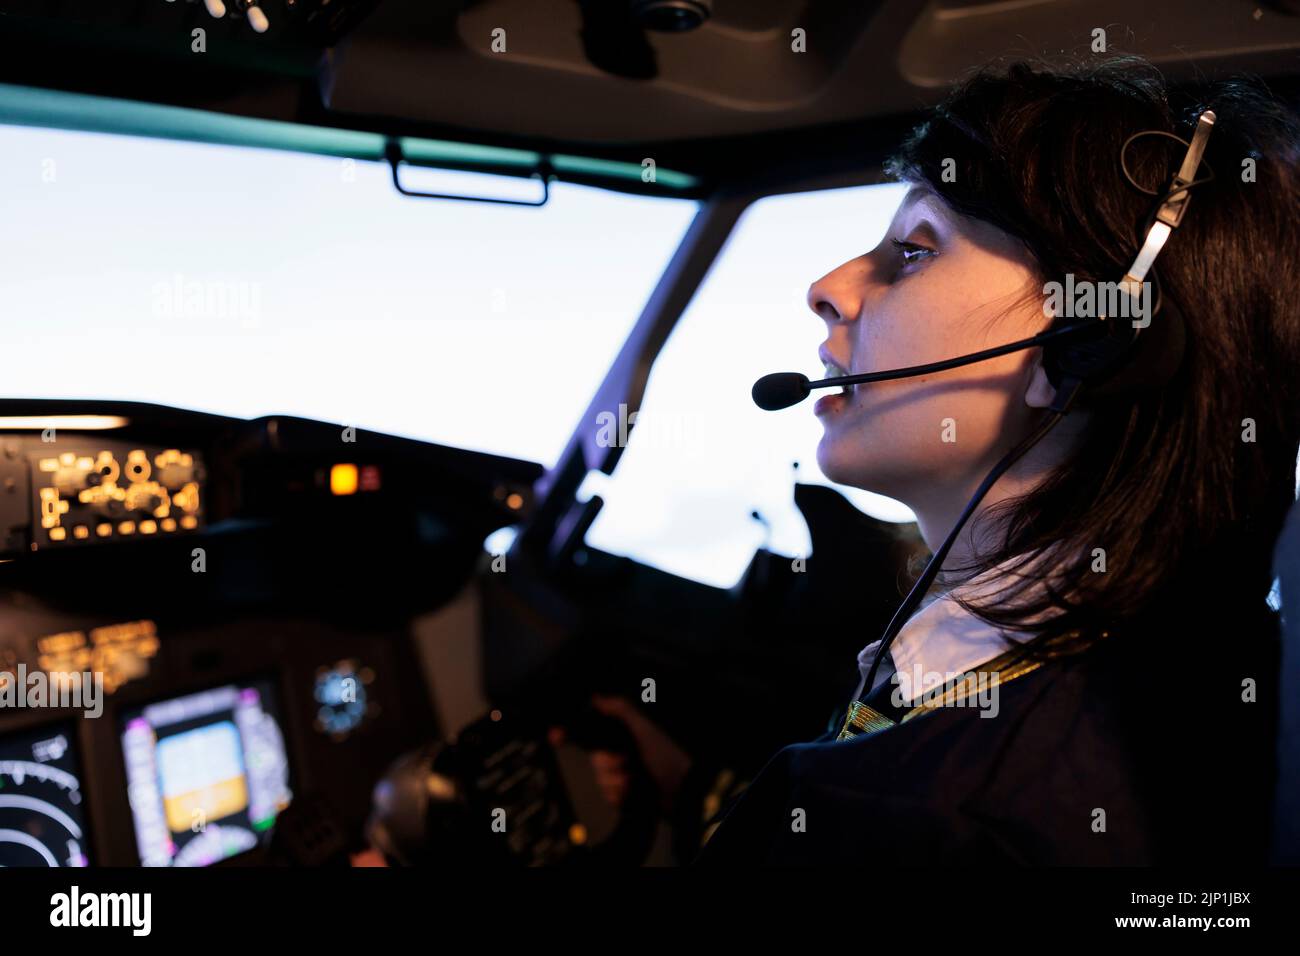 Female copilot flying plane from cockpit with dashboard command and control panel, using steering wheel and control panel for windscreen navigation. Woman using lever to fly aircraft. Stock Photo